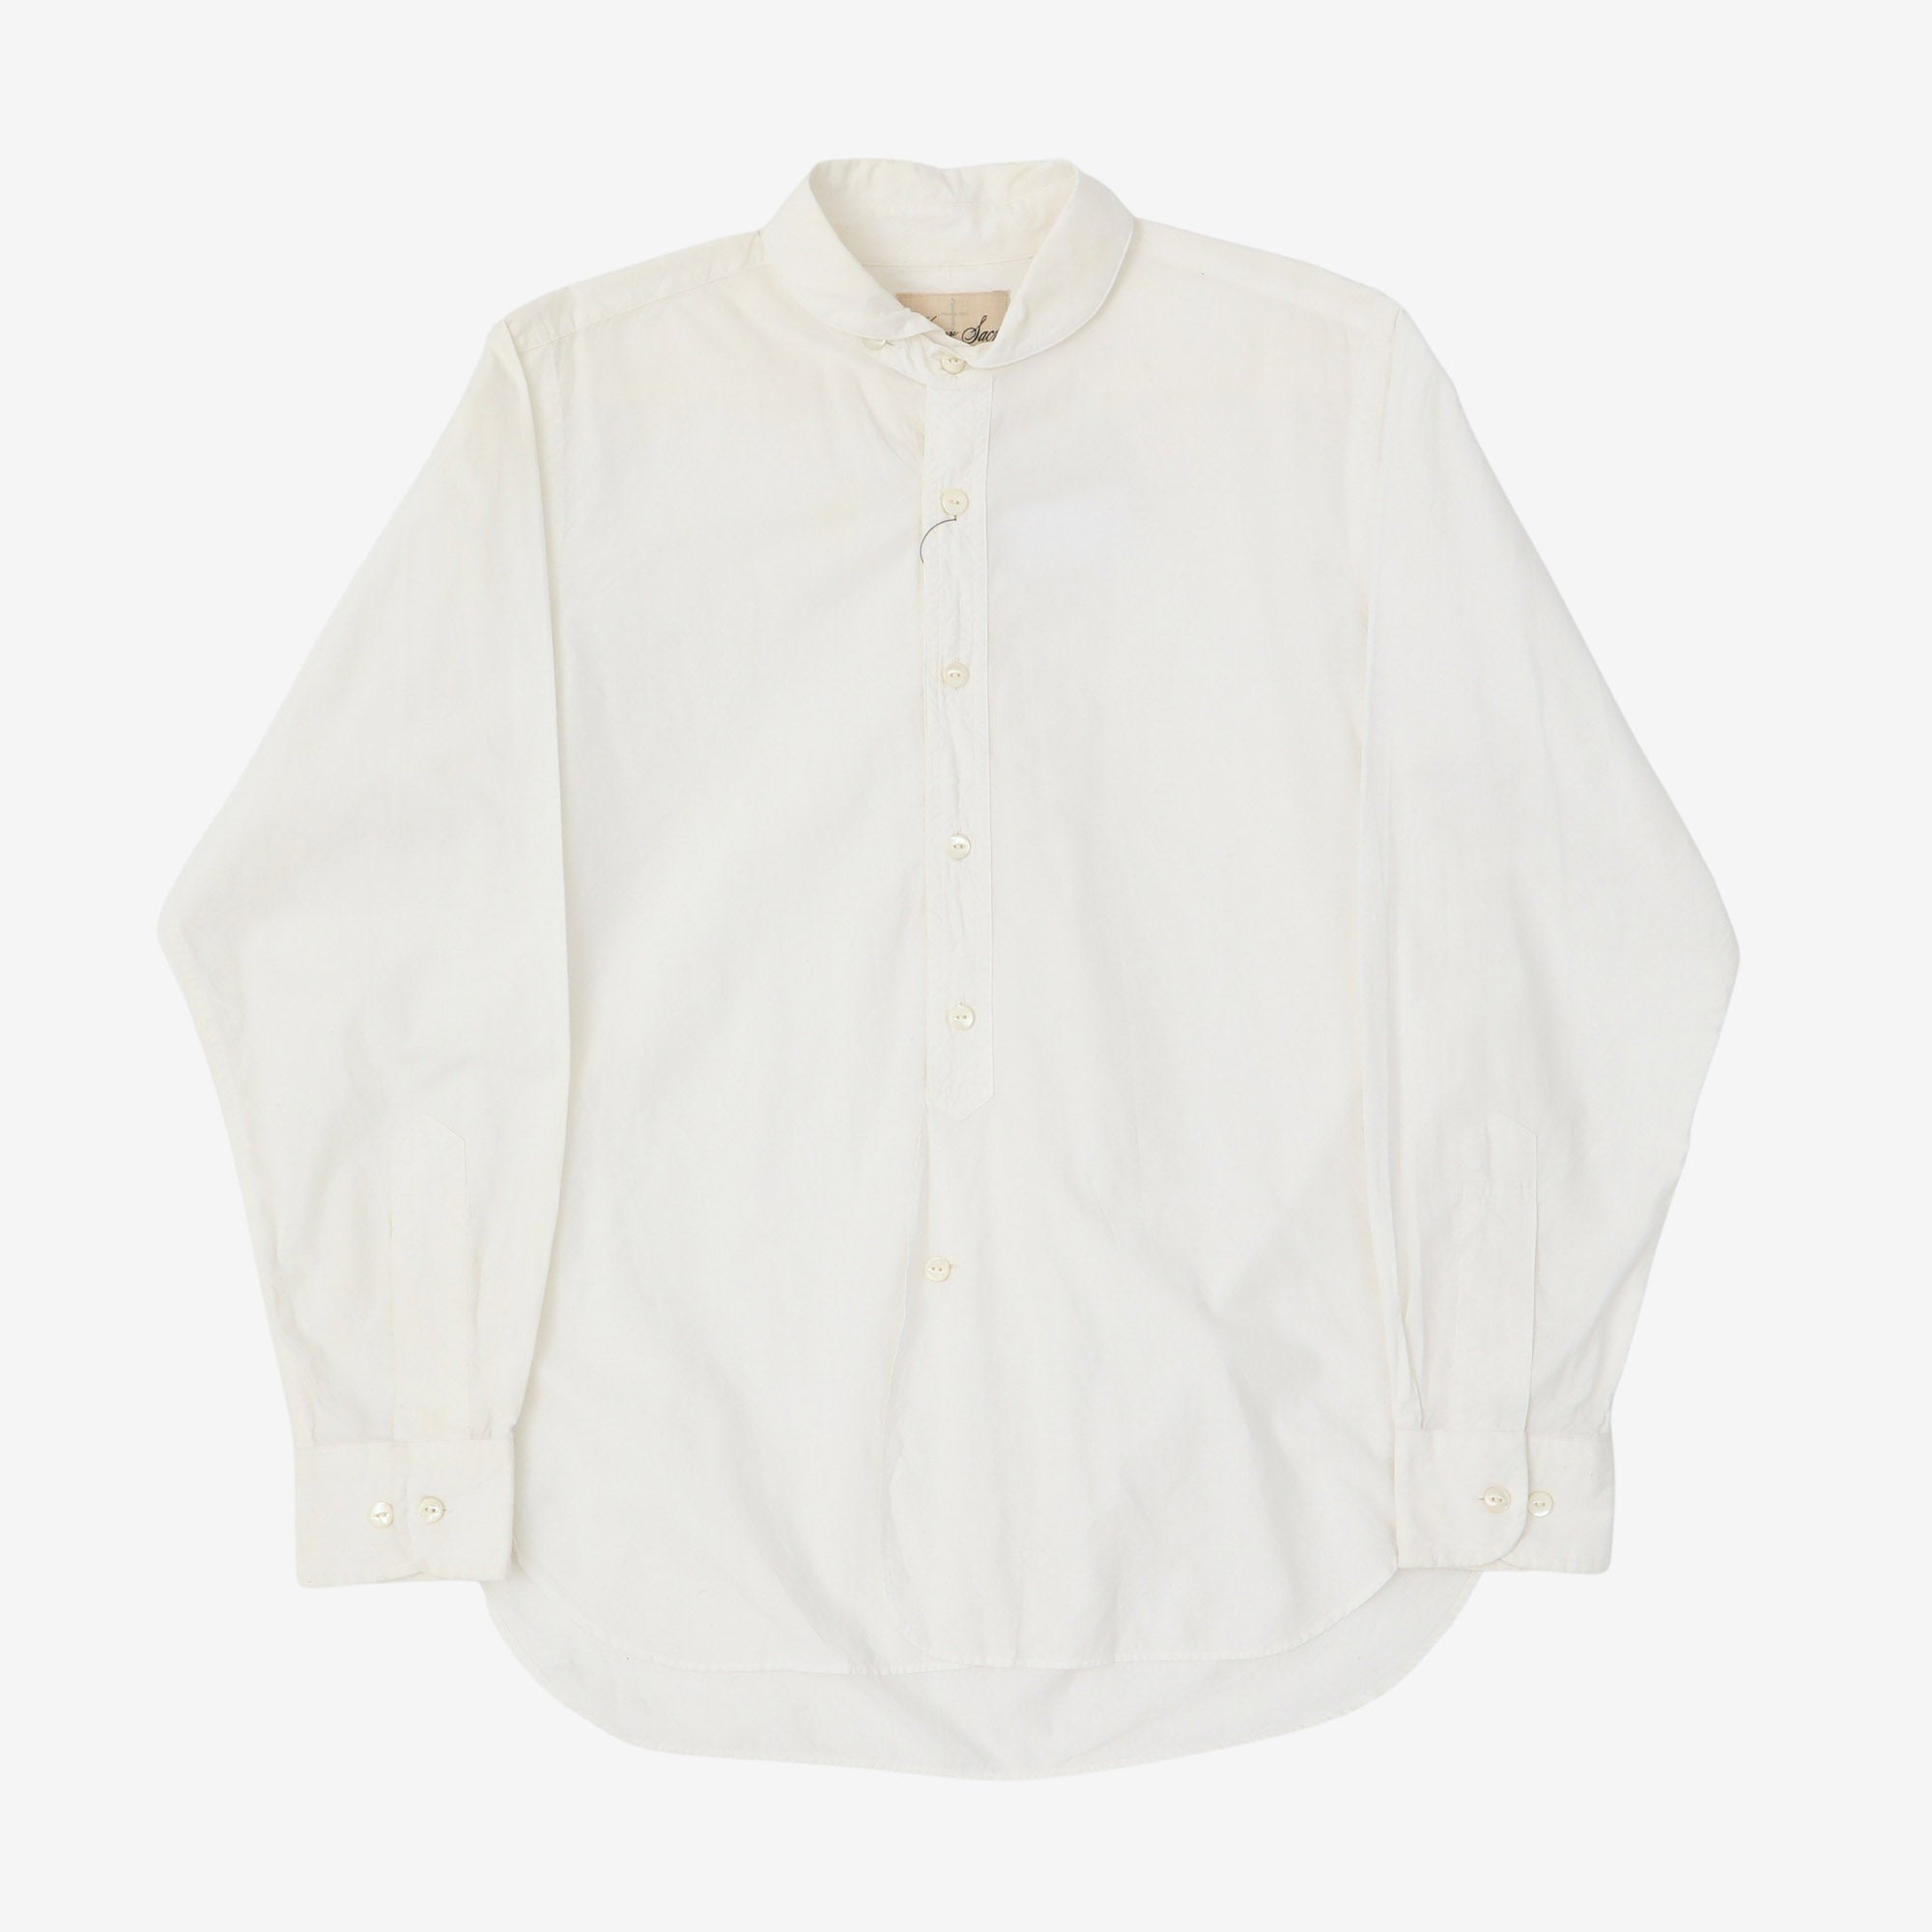 Rounded Collar Shirt